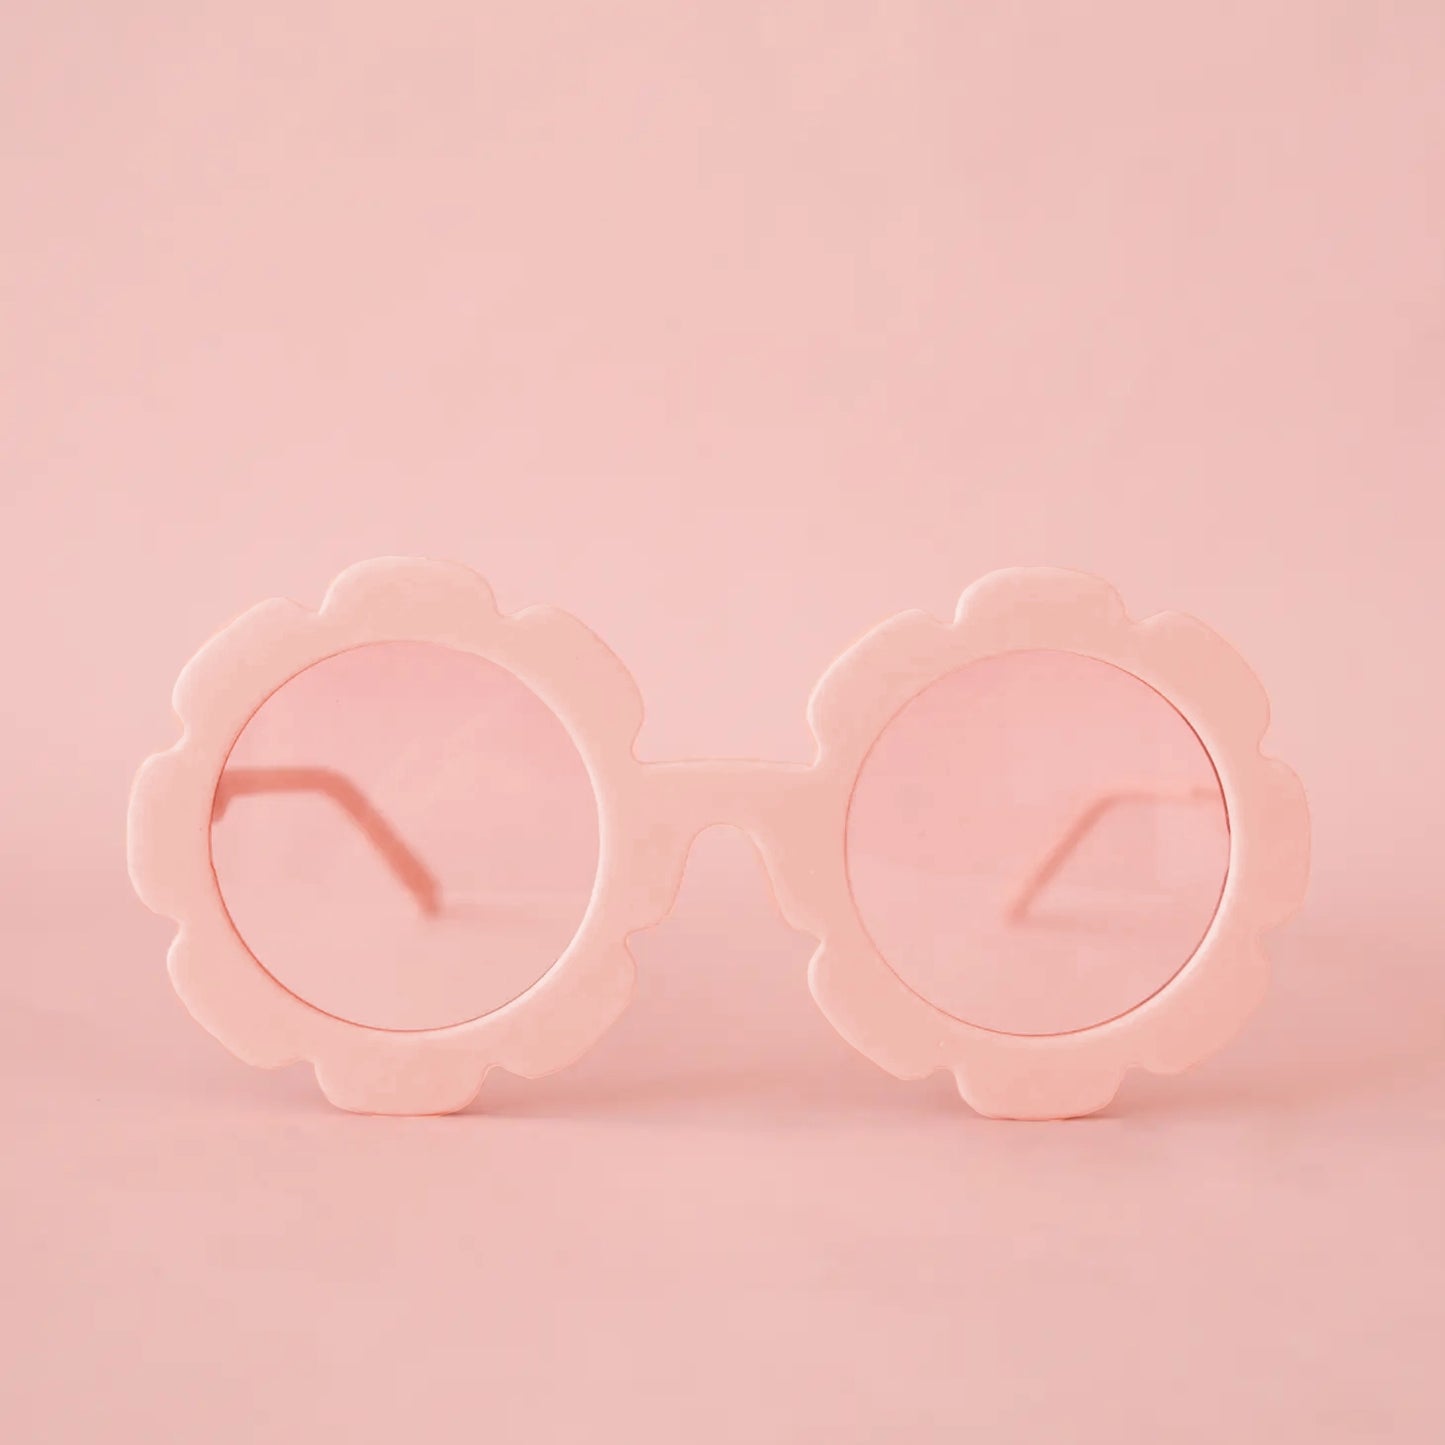 On a pink background is a pink pair of flower shaped sunglasses with a light pink circle lens in the center. 